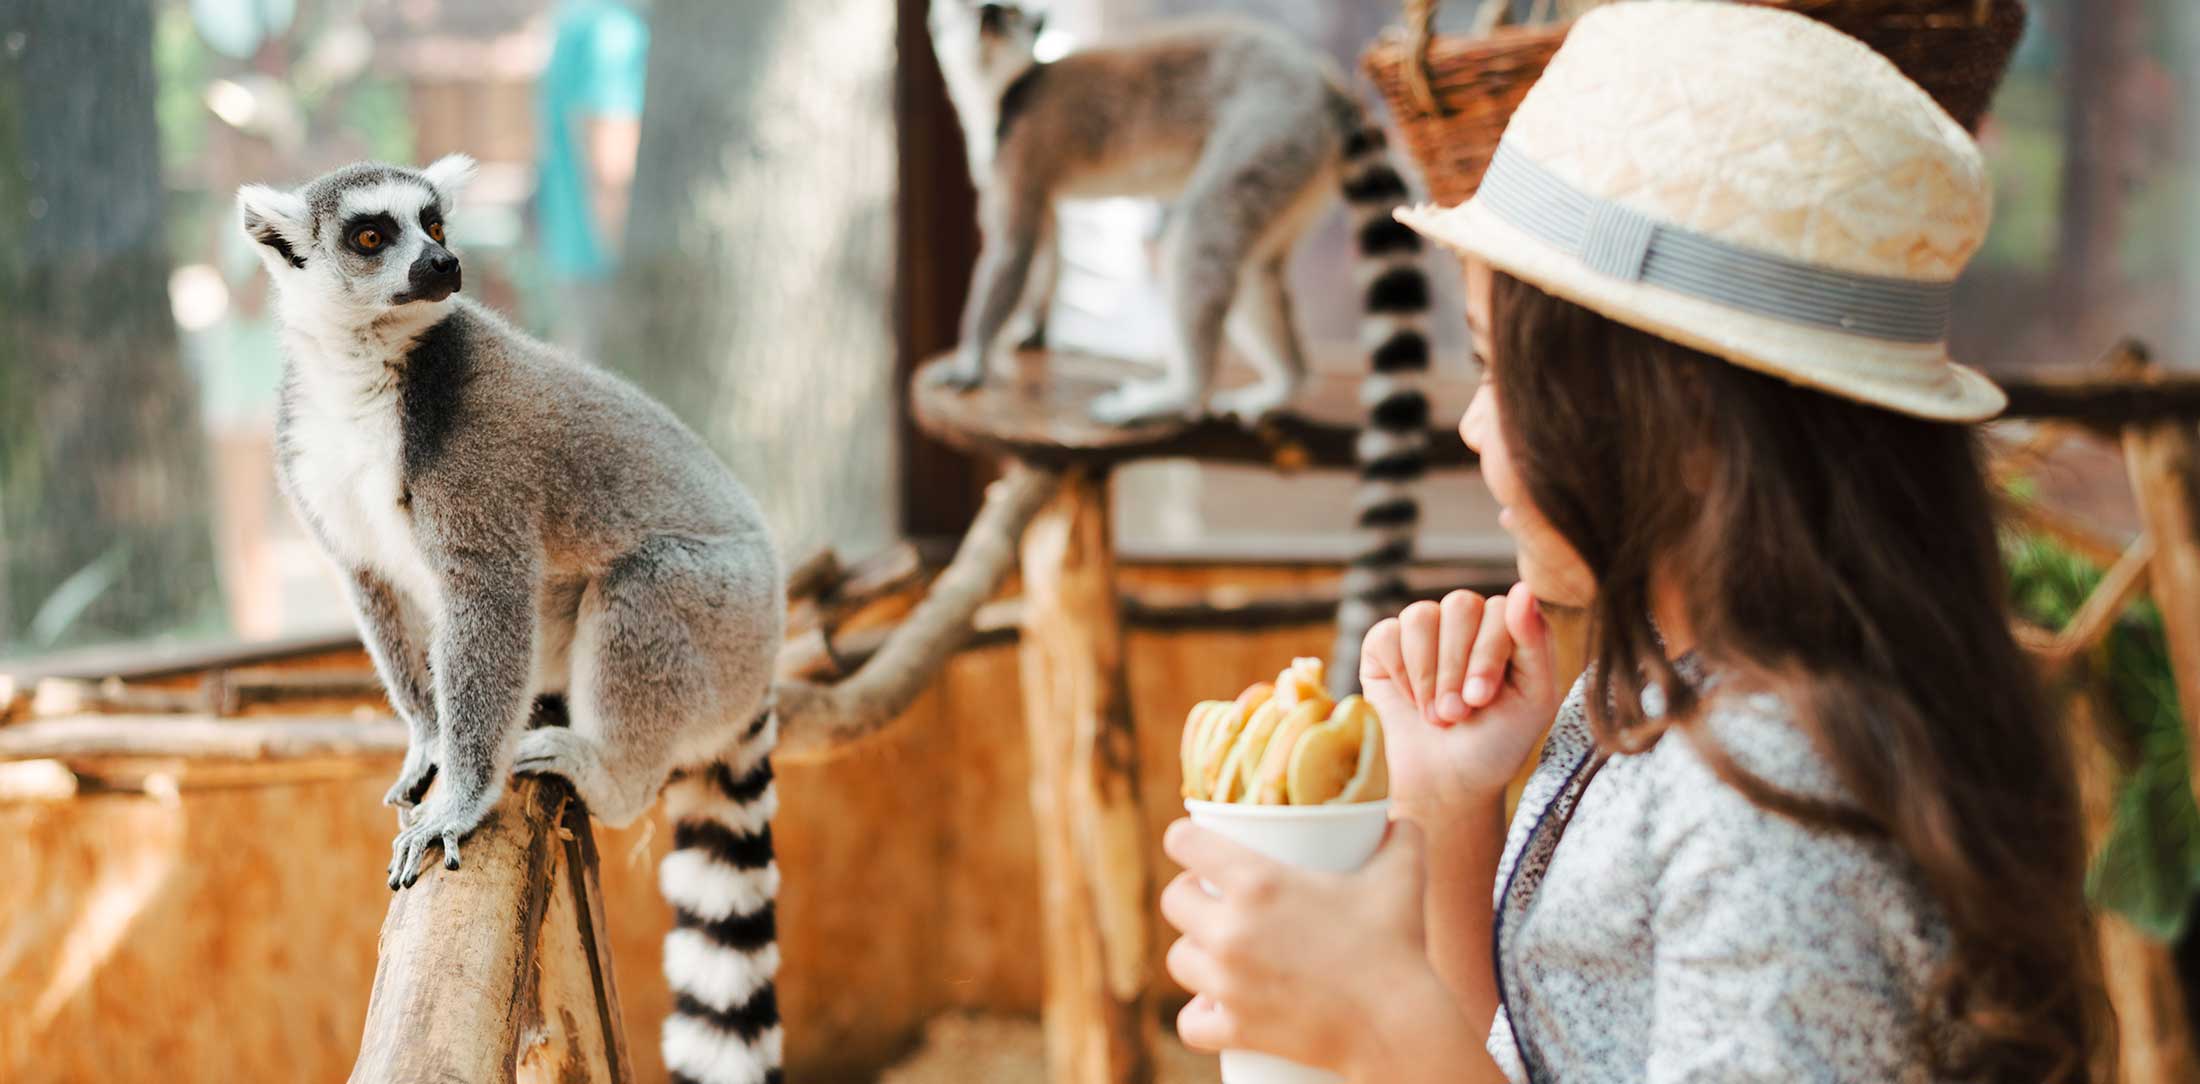 girl holding glass apple slices looking ring tailed lemur at zoo